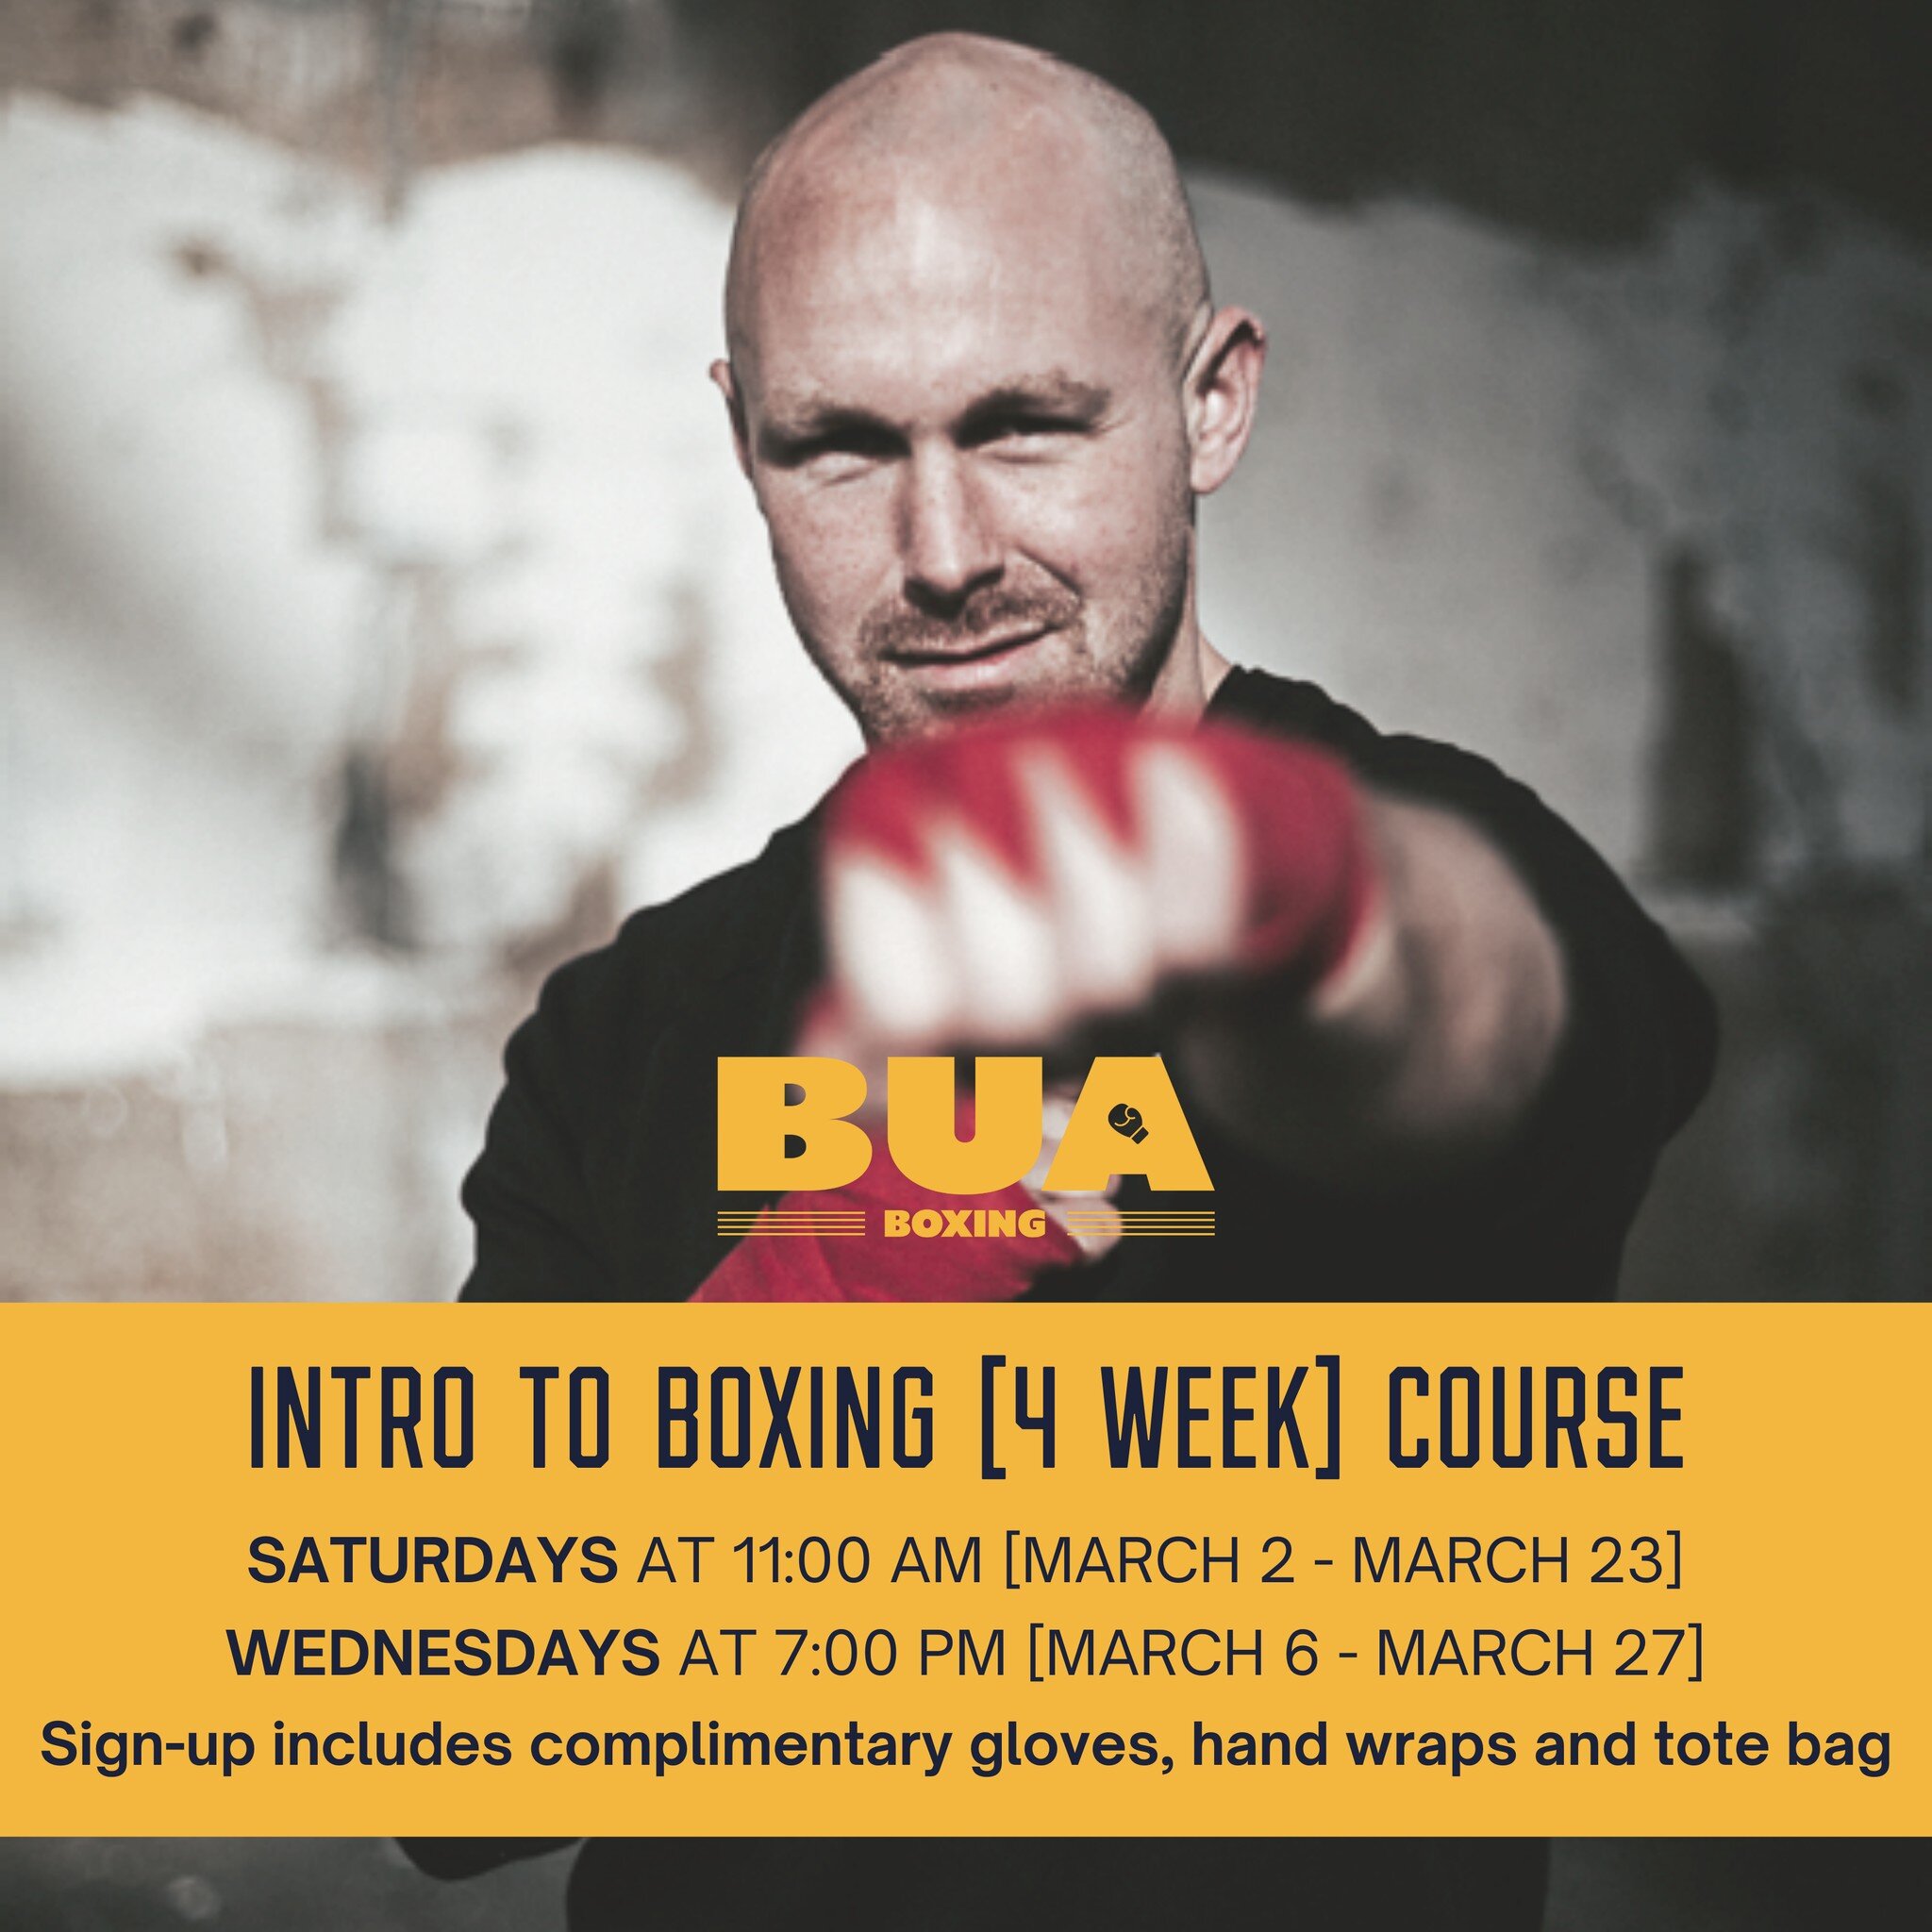 This March we're offering not one, but TWO Intro to Boxing Courses, and booking is now open!

Choose from either Saturday mornings at 11am (3/2, 3/9, 3/16, &amp; 3/23) or Wednesday evenings at 7pm (3/6, 3/13, 3/20, &amp; 3/27) &mdash; if you&rsquo;re